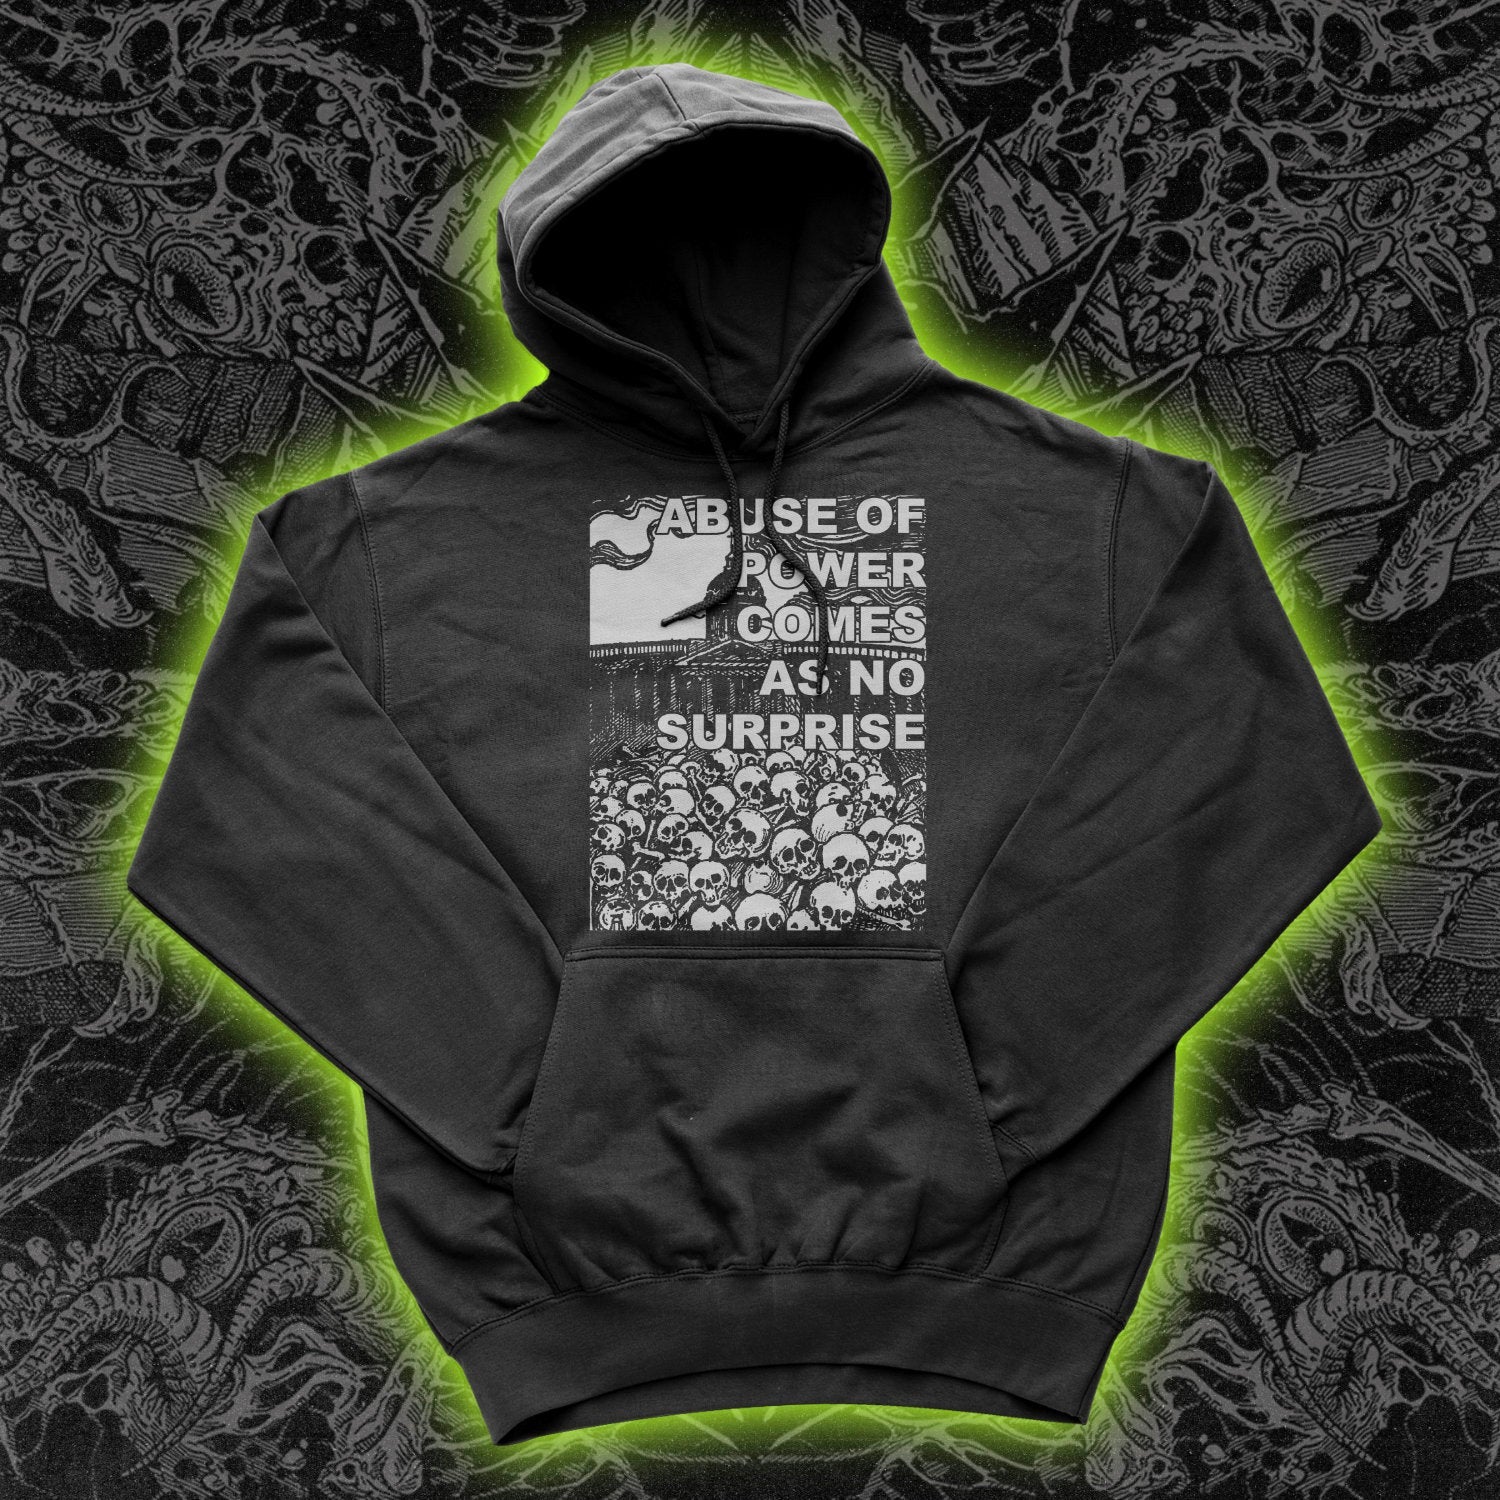 Abuse Of Power Comes As No Surprise Hoodie